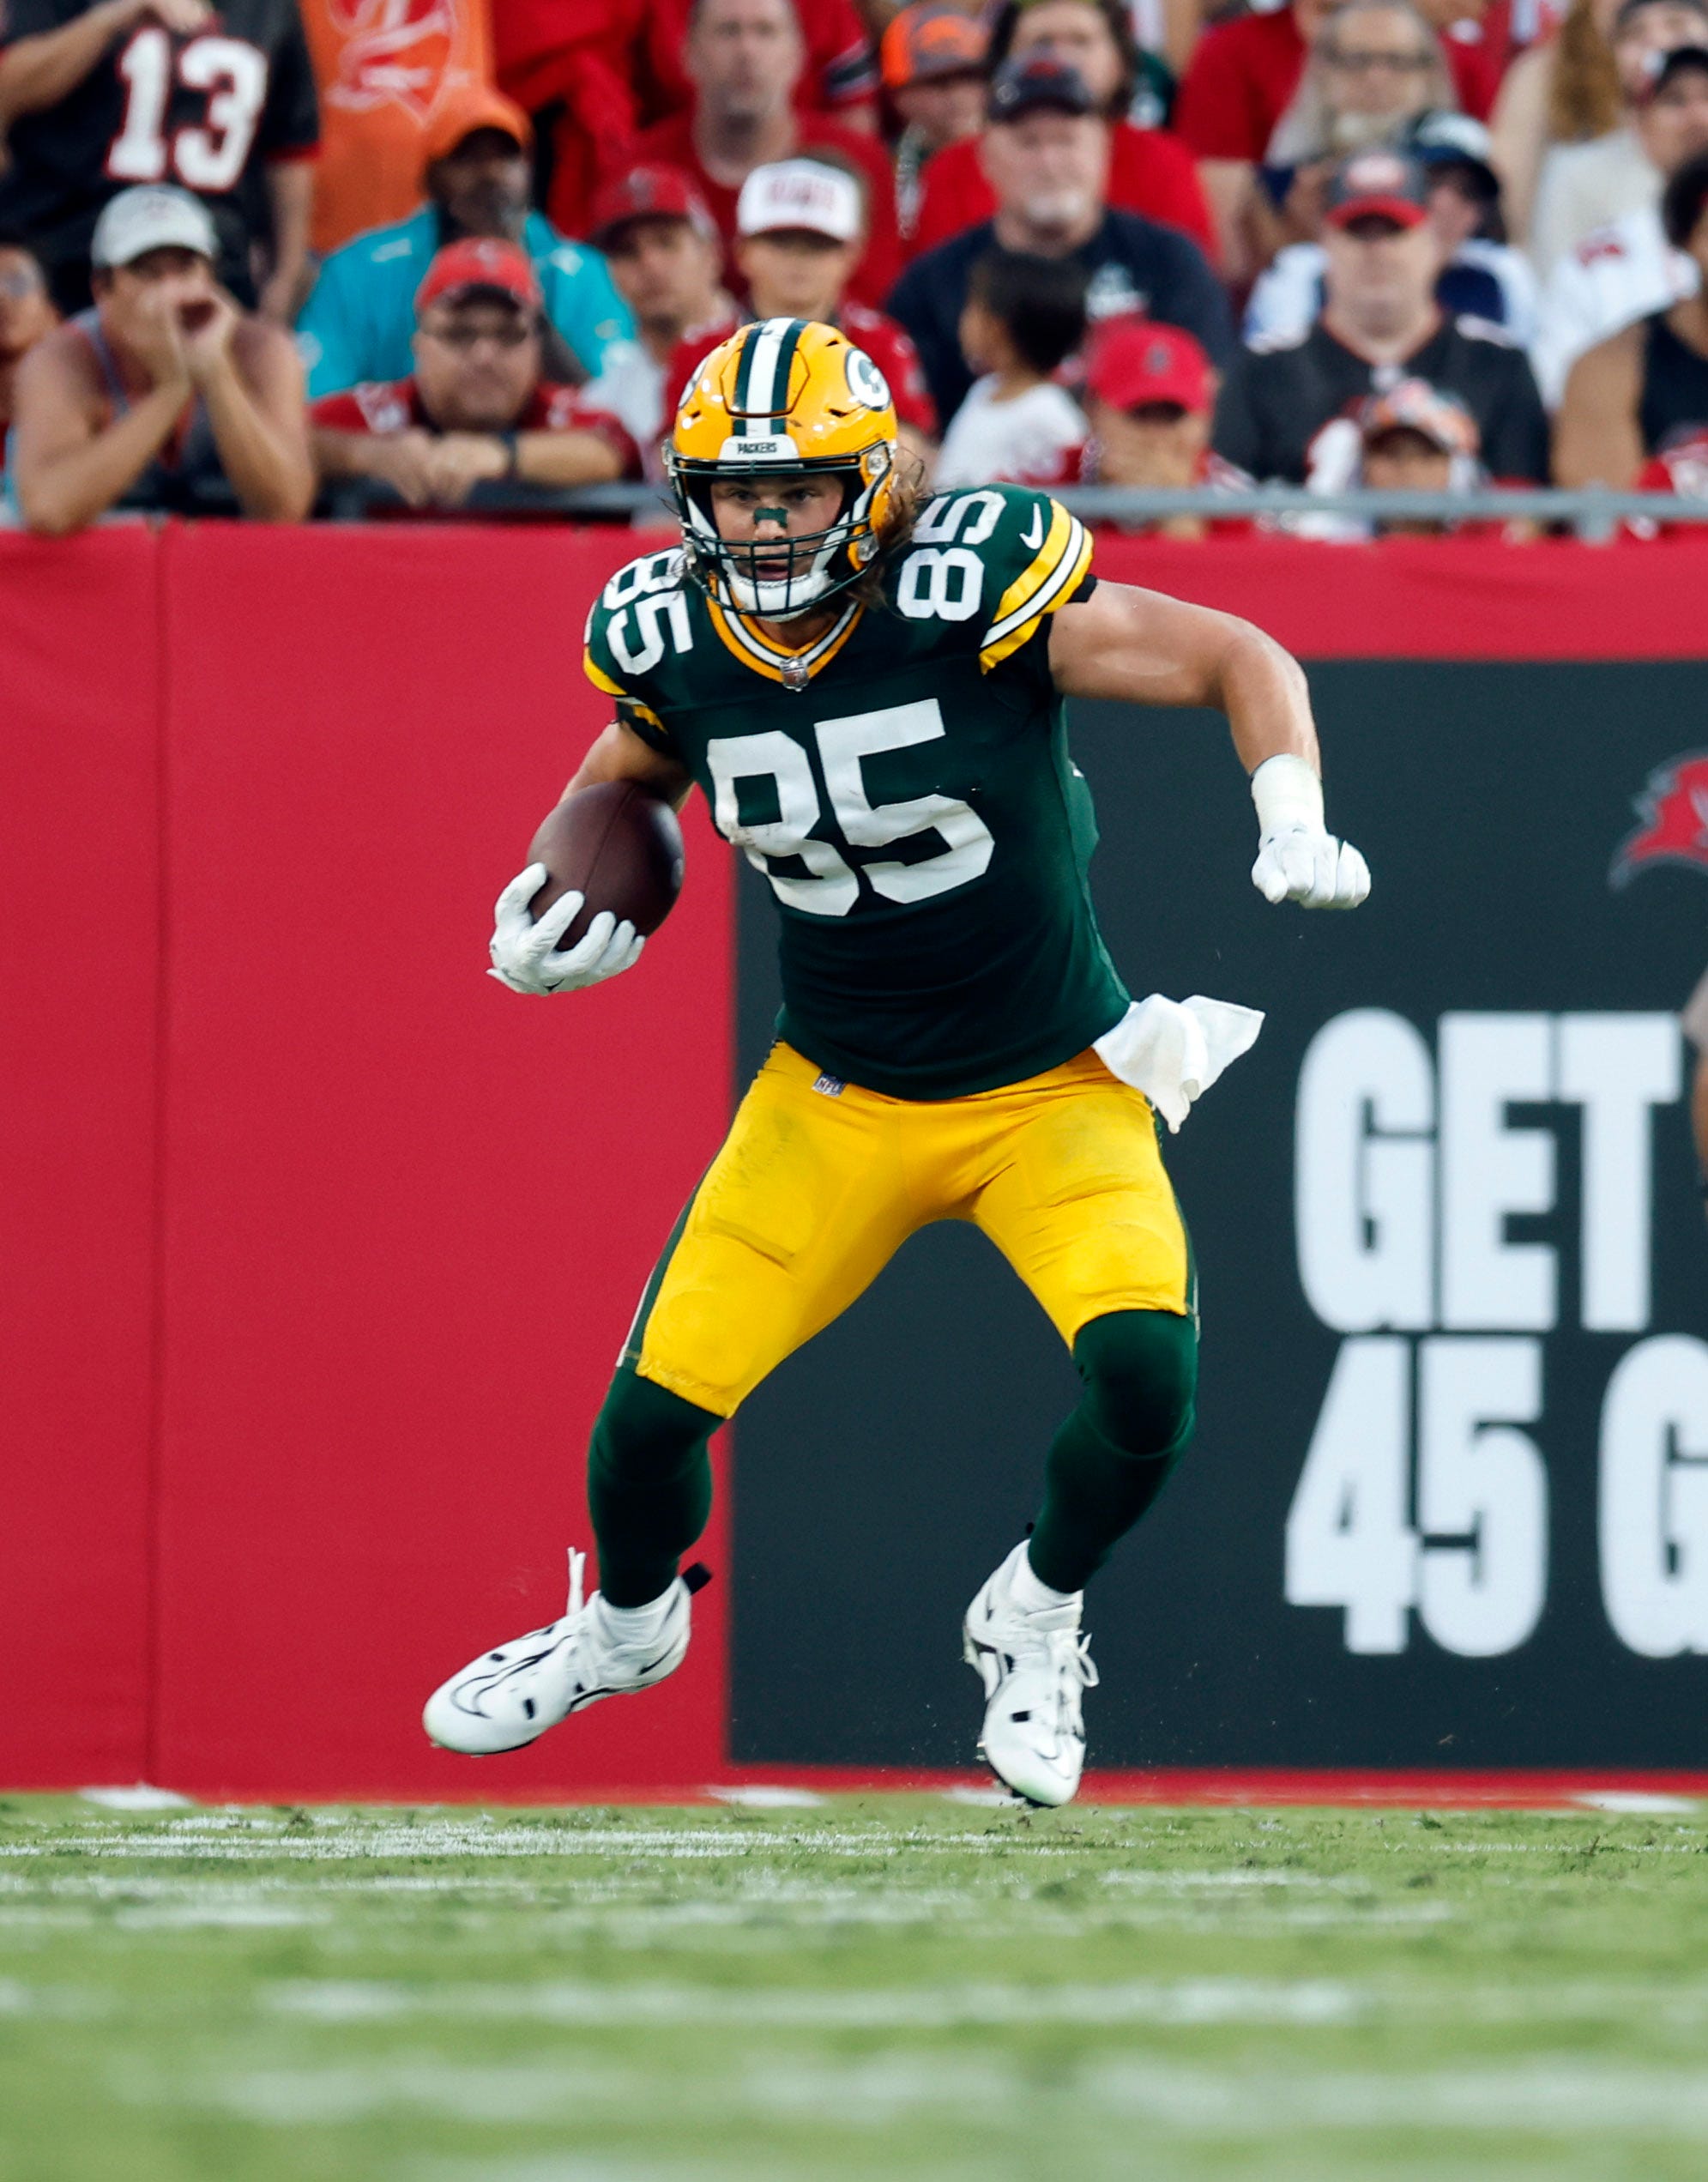 Green Bay Packers tight end Robert Tonyan (85) goes up field against the Tampa Bay Buccaneers during the second half of the game on Sept. 25, 2022, at Raymond James Stadium. Tonyan had six catches for 37 yards.